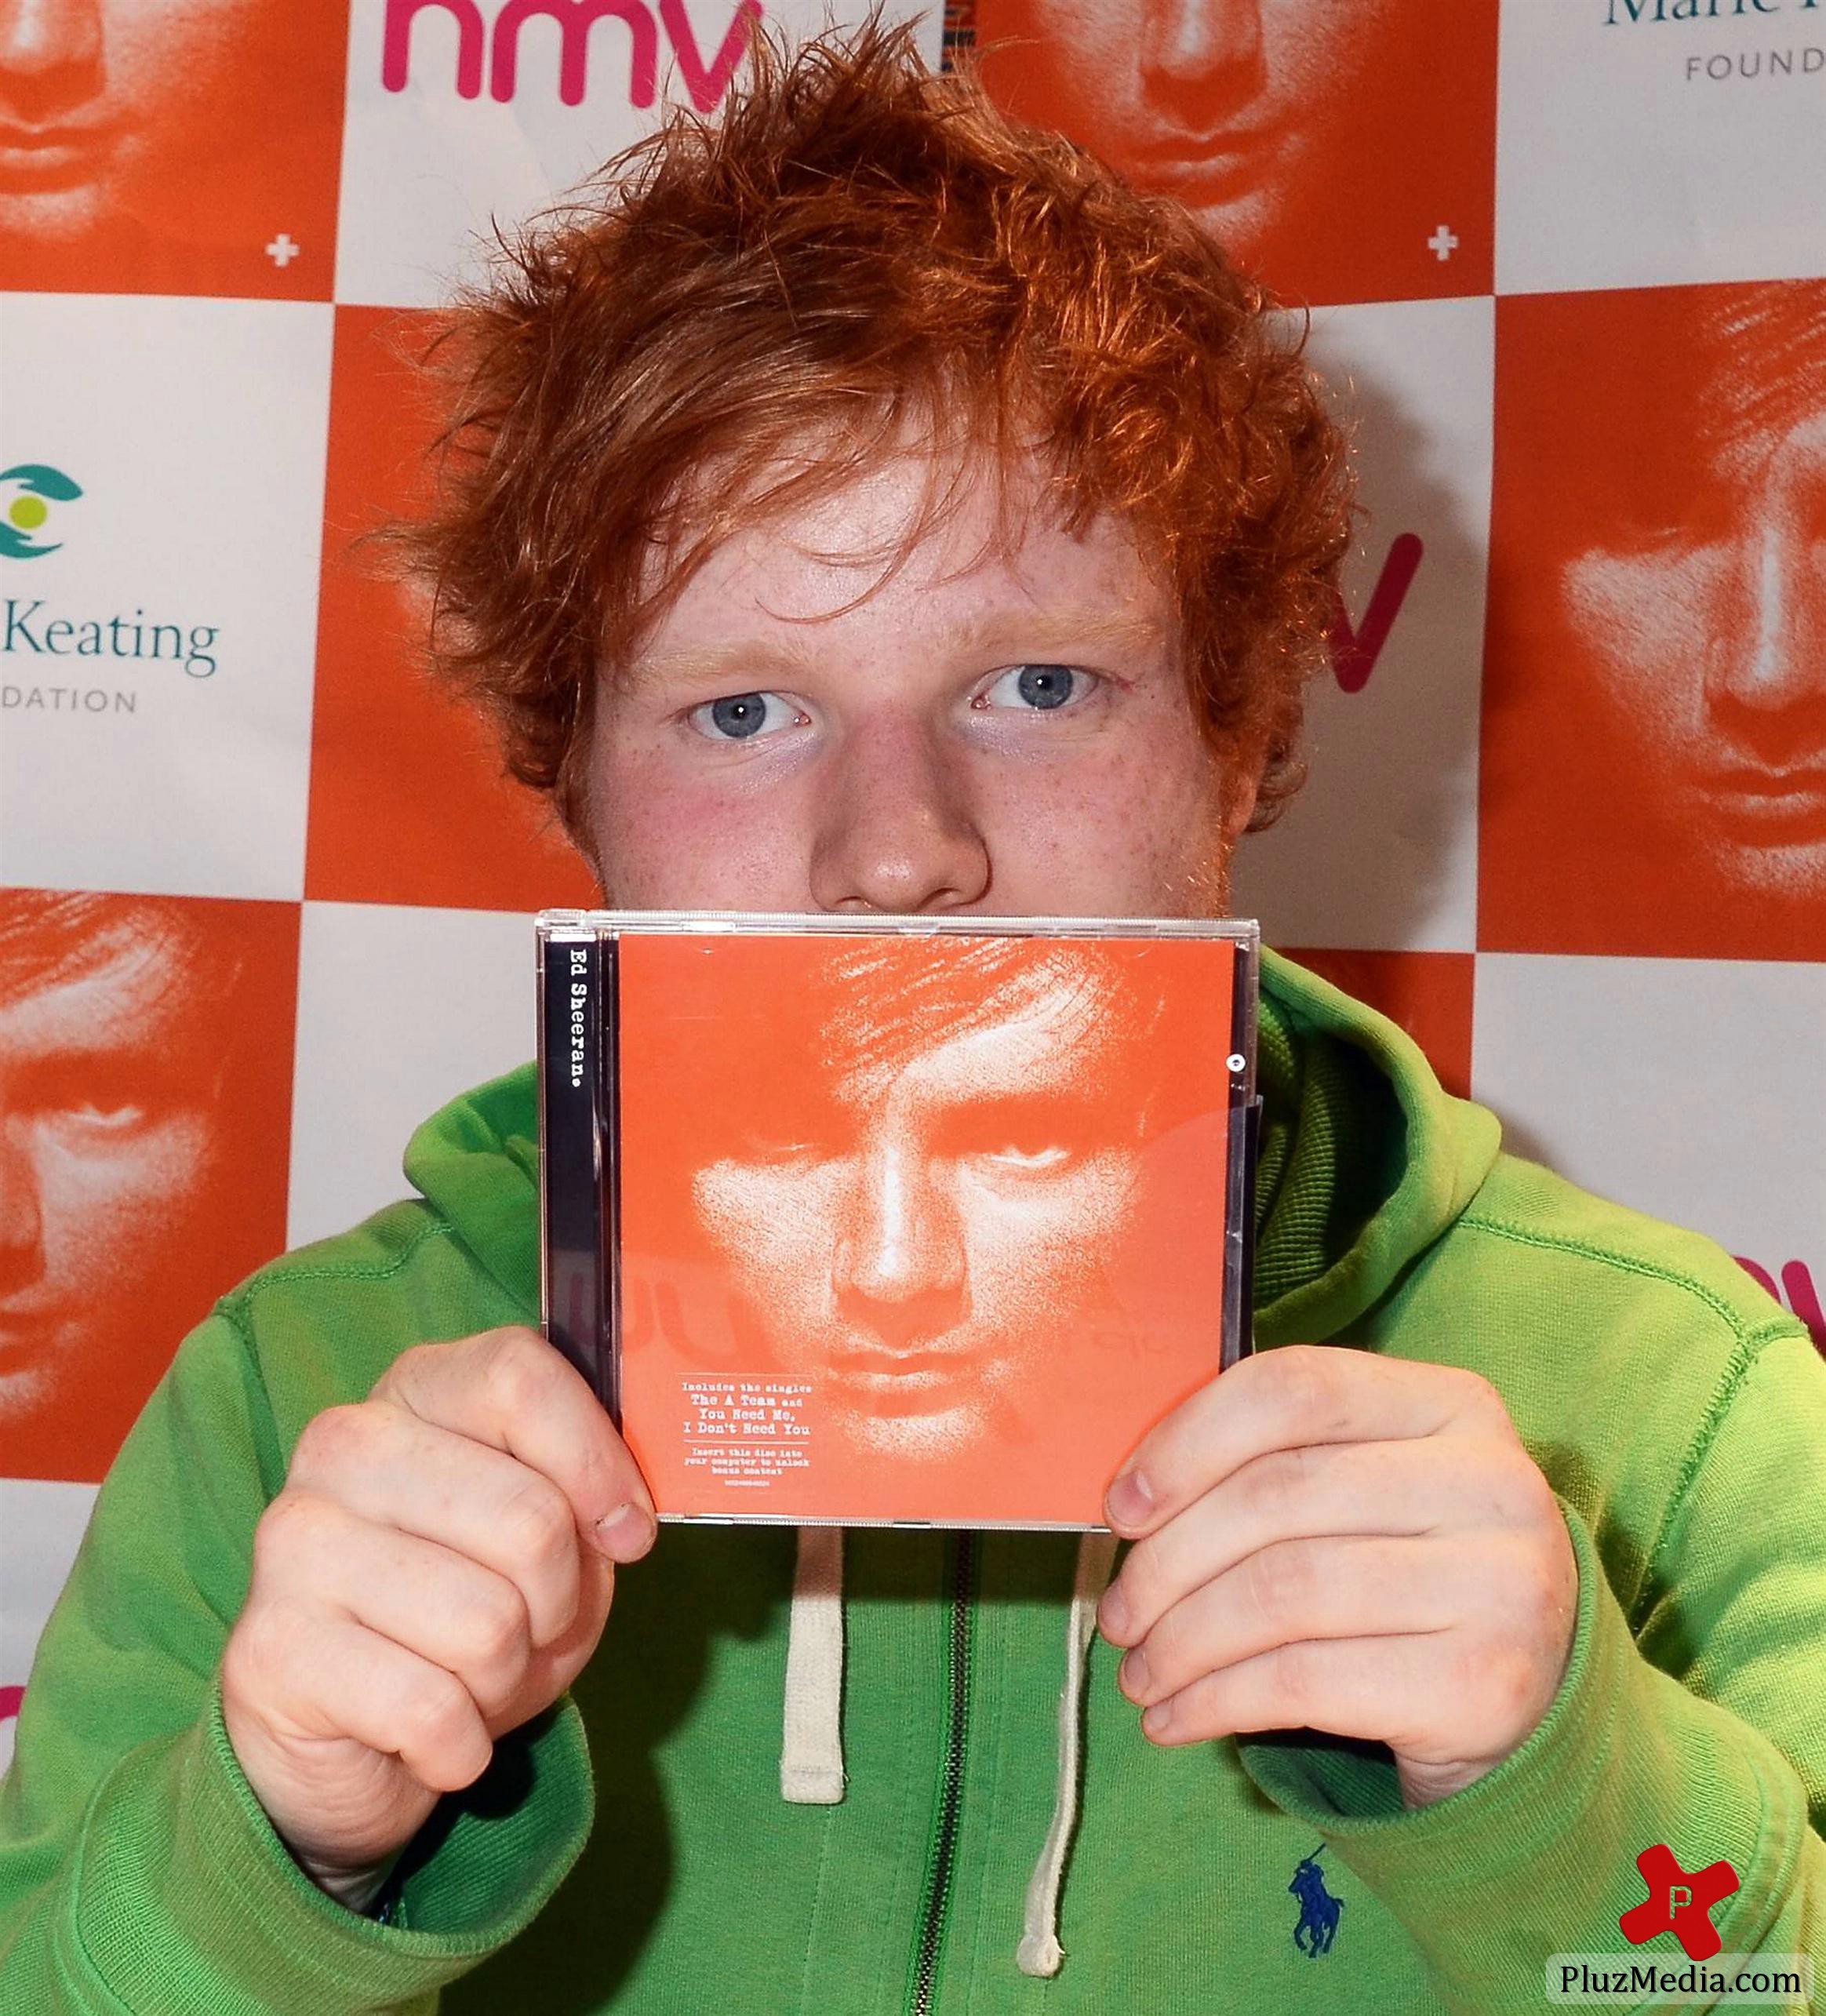 Ed Sheeran performs songs from his album '+' at HMV | Picture 83986